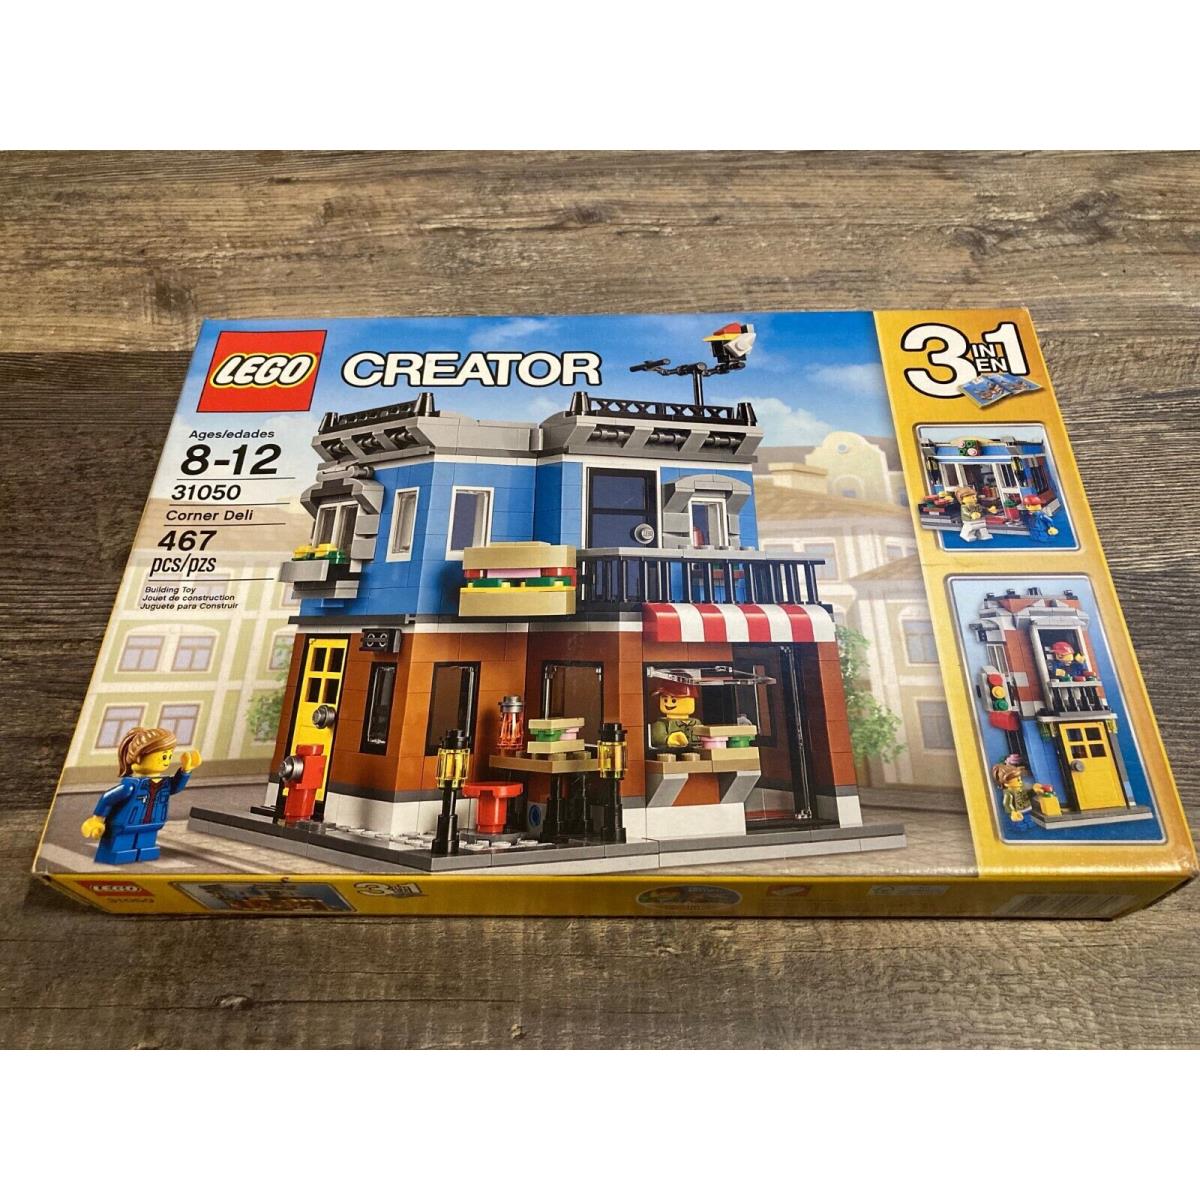 Lego 3 in 1 Creator Set 31050 467 Pieces - Retired Set Clean